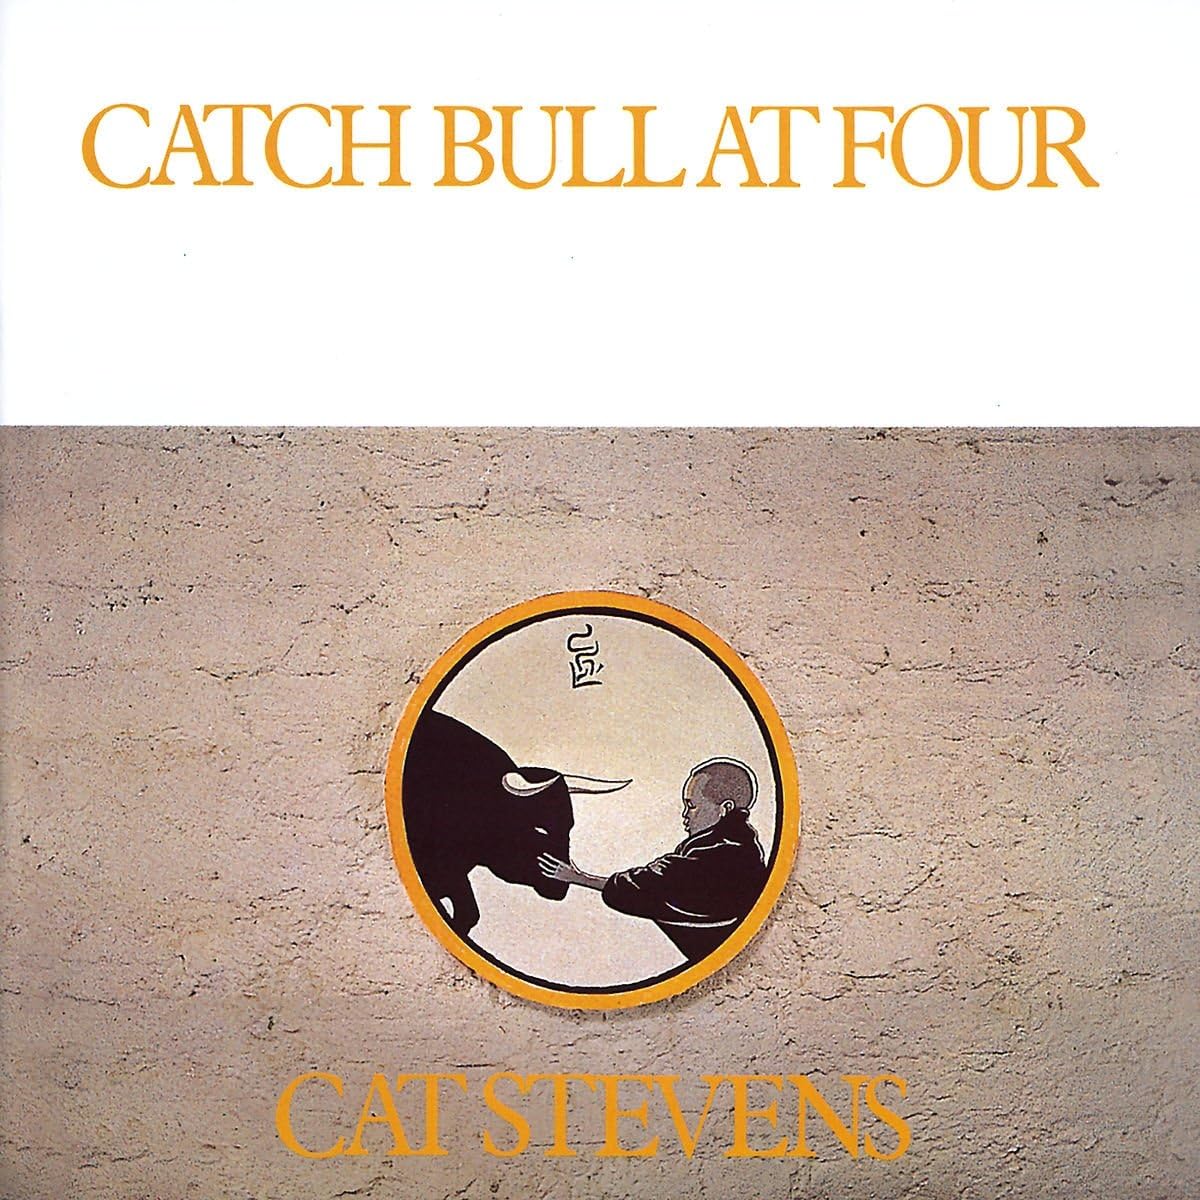 Cat Stevens - Catch Bull at Four, 1972 Is the sixth album by Cat Stevens. Catch Bull at Four was well received both commercially and critically. The song 'Sitting' was released as a single in July 1972, reaching 16 on the Billboard Hot 100.